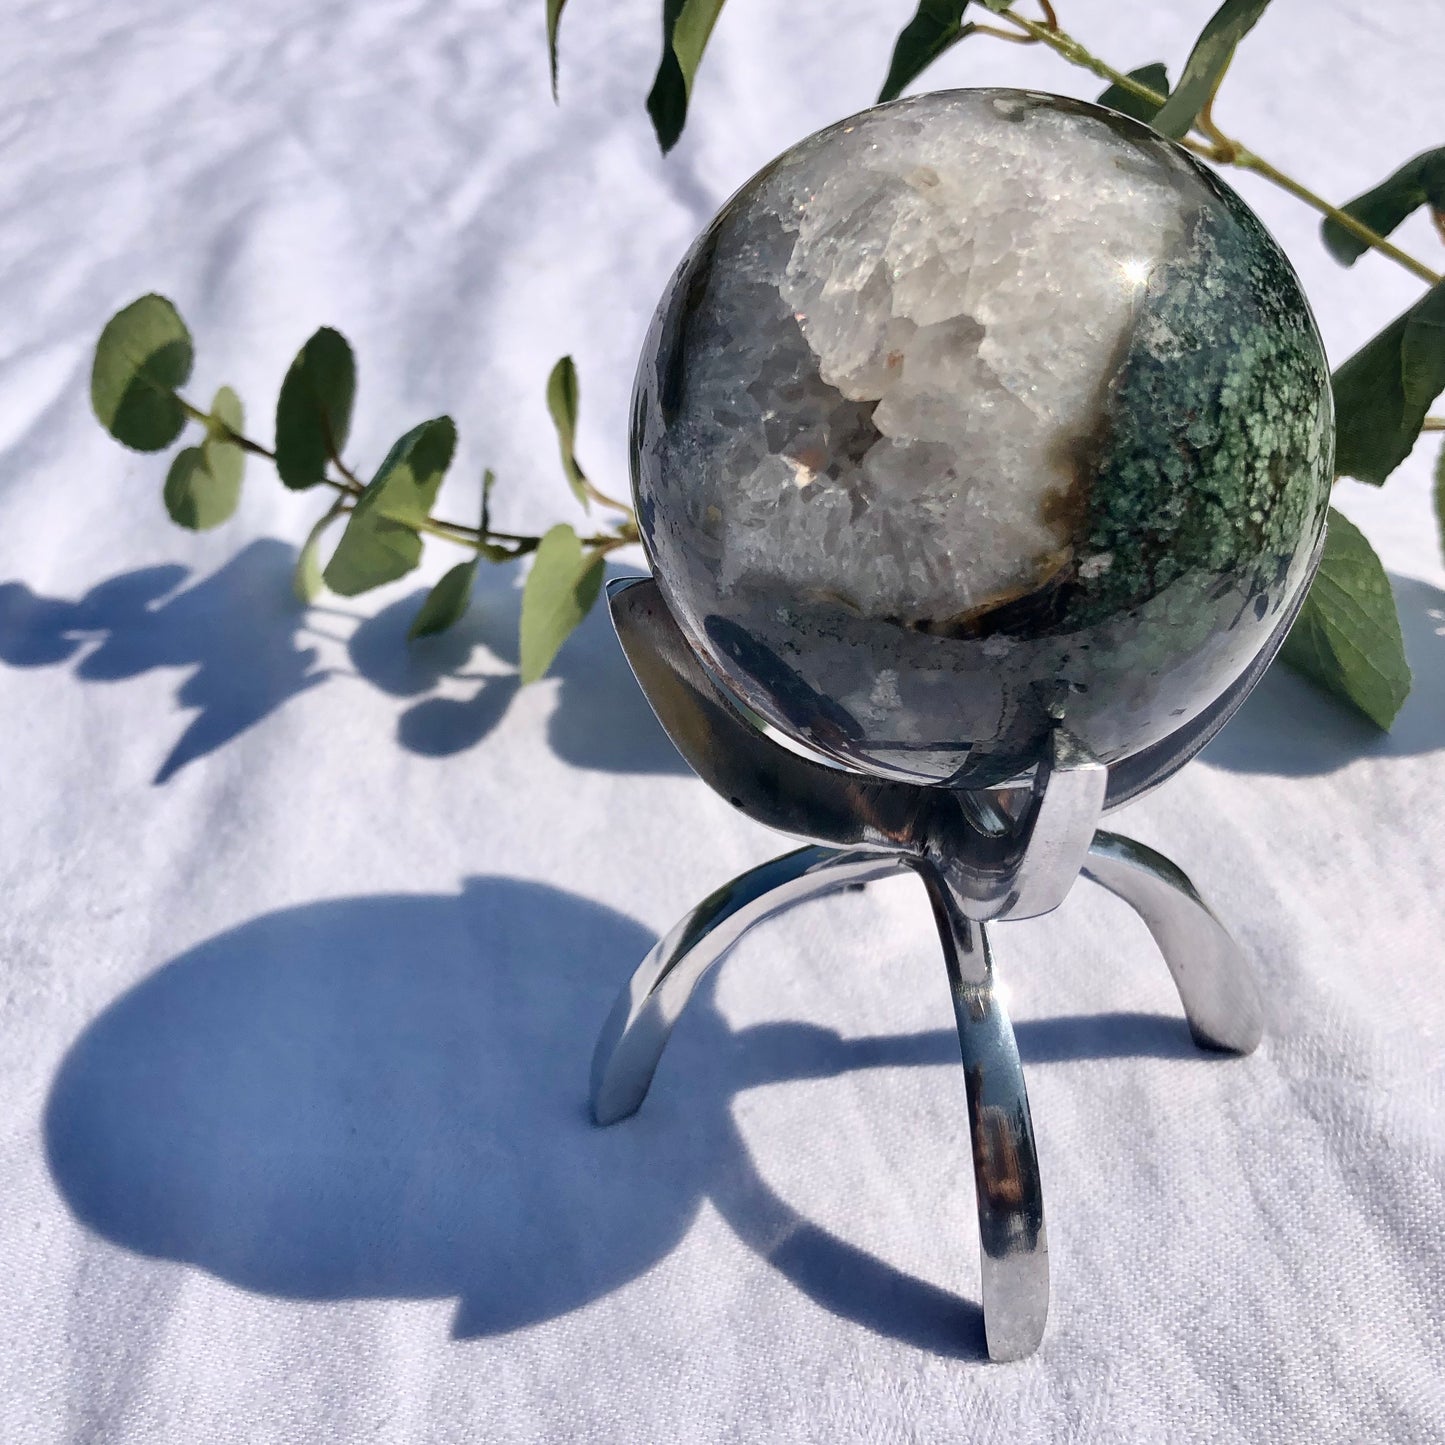 Claw Mineral Stand / Crystal Sphere Holder - Aluminium Large